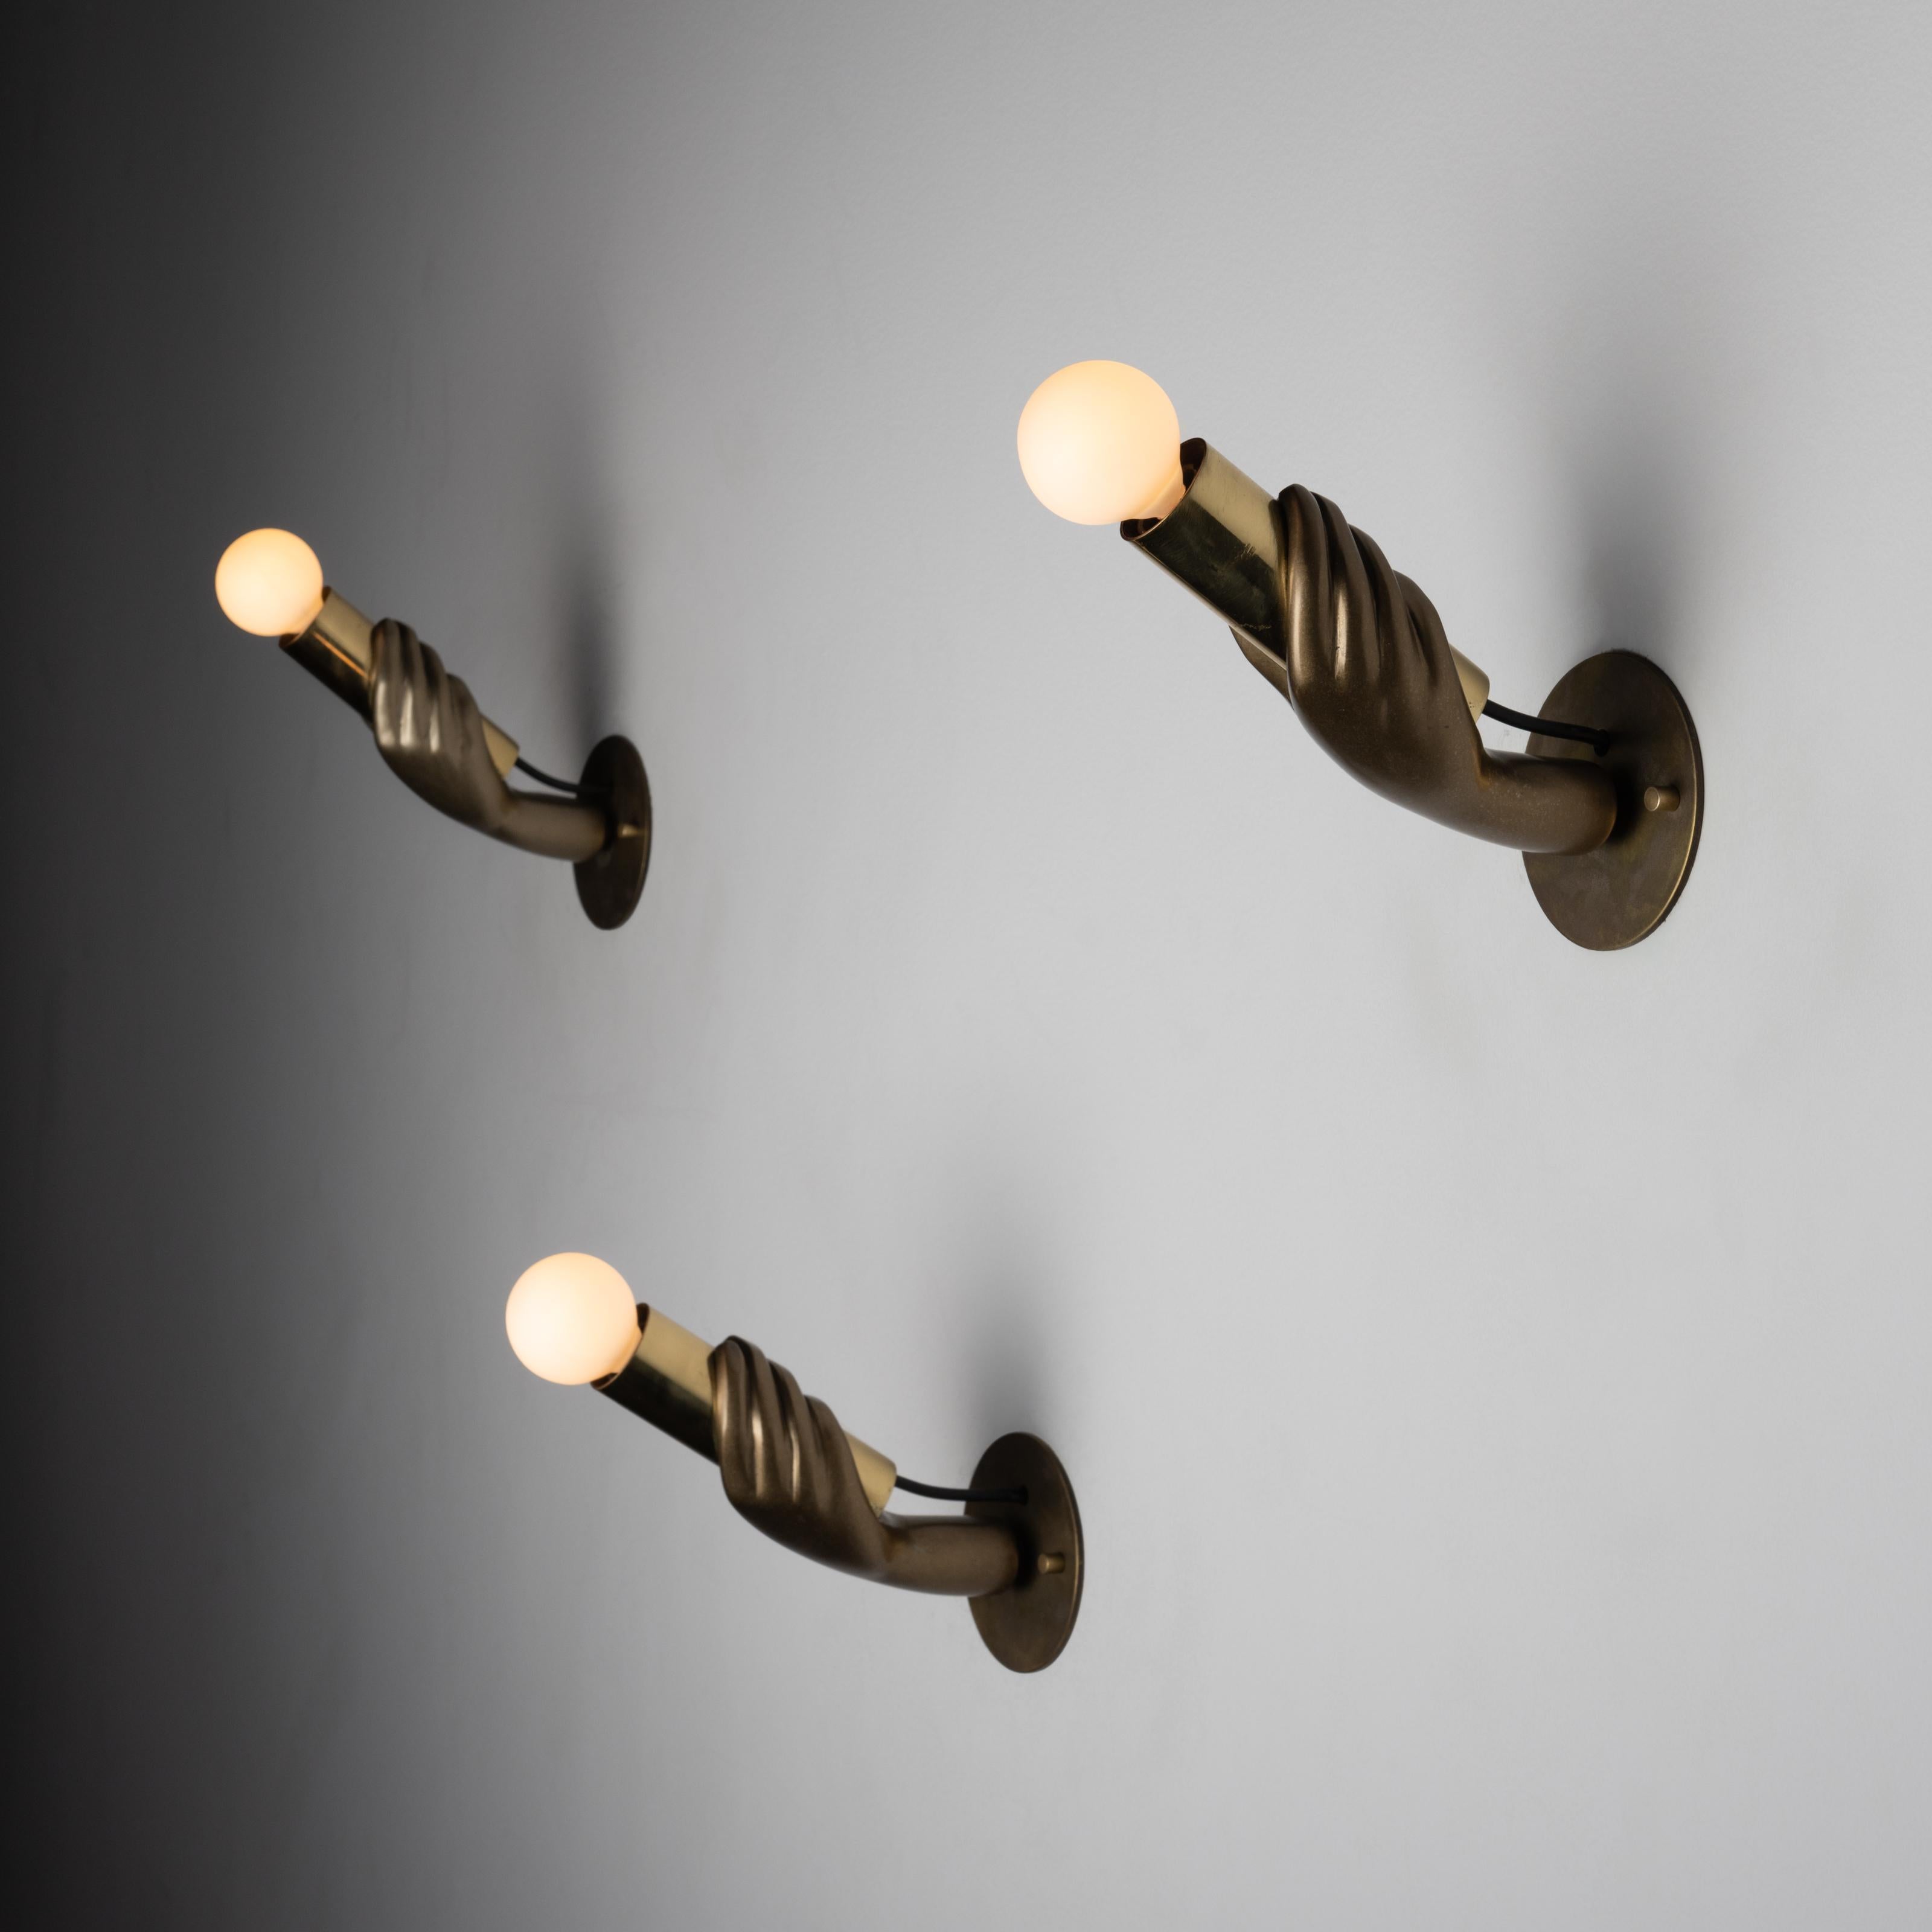 Italian hand sconces. Designed and manufactured in Italy. Figurative impressionist hand sconces fit for a dramatic hallway of any kind. Swivel at the base of the hands allow for articulation. We recommend using 40w maximum E14 bulbs. Rewired for US